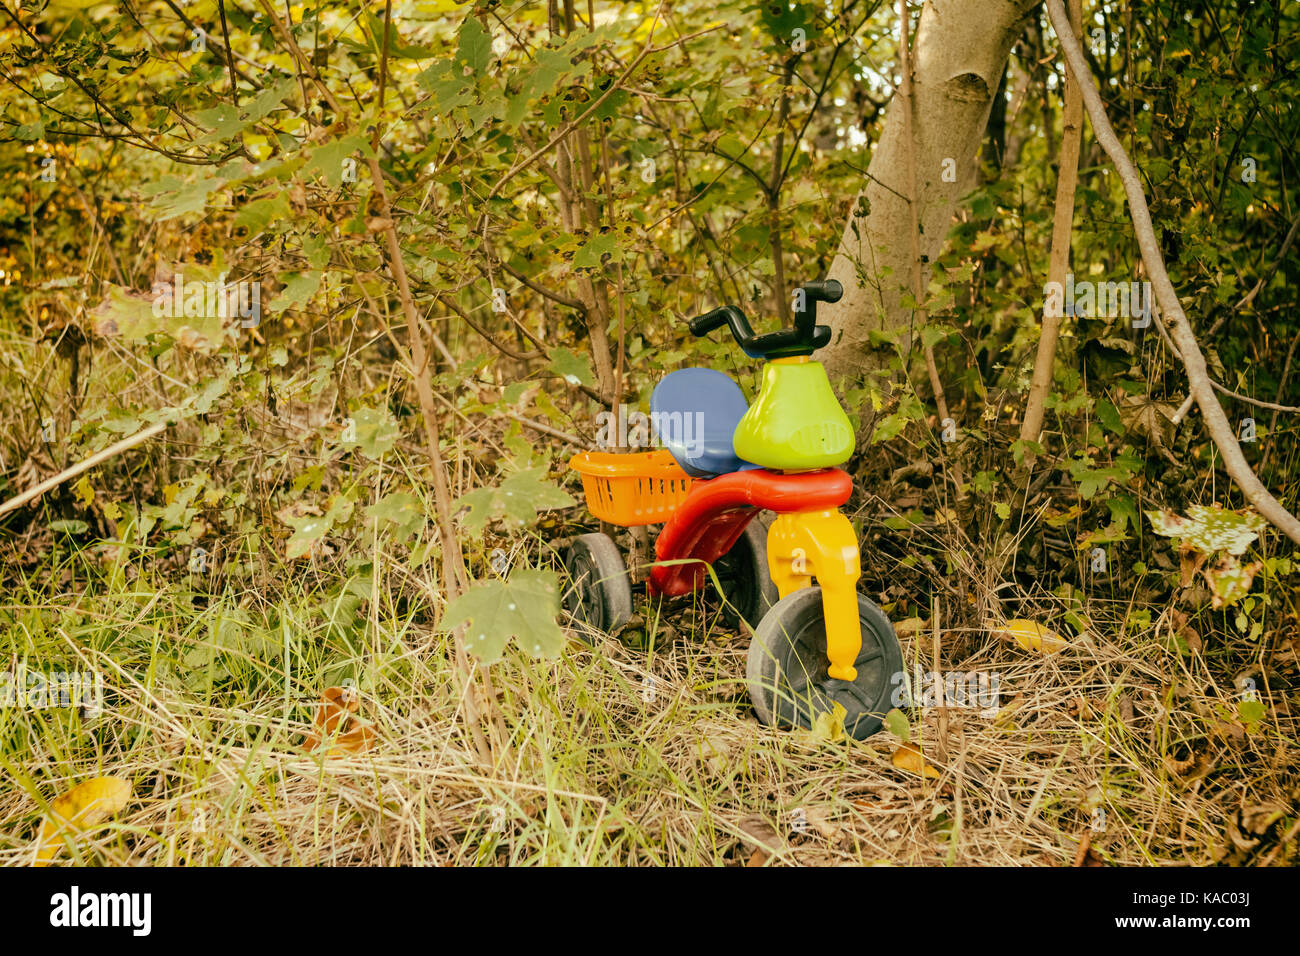 Abandoned toy cart in the forest Stock Photo